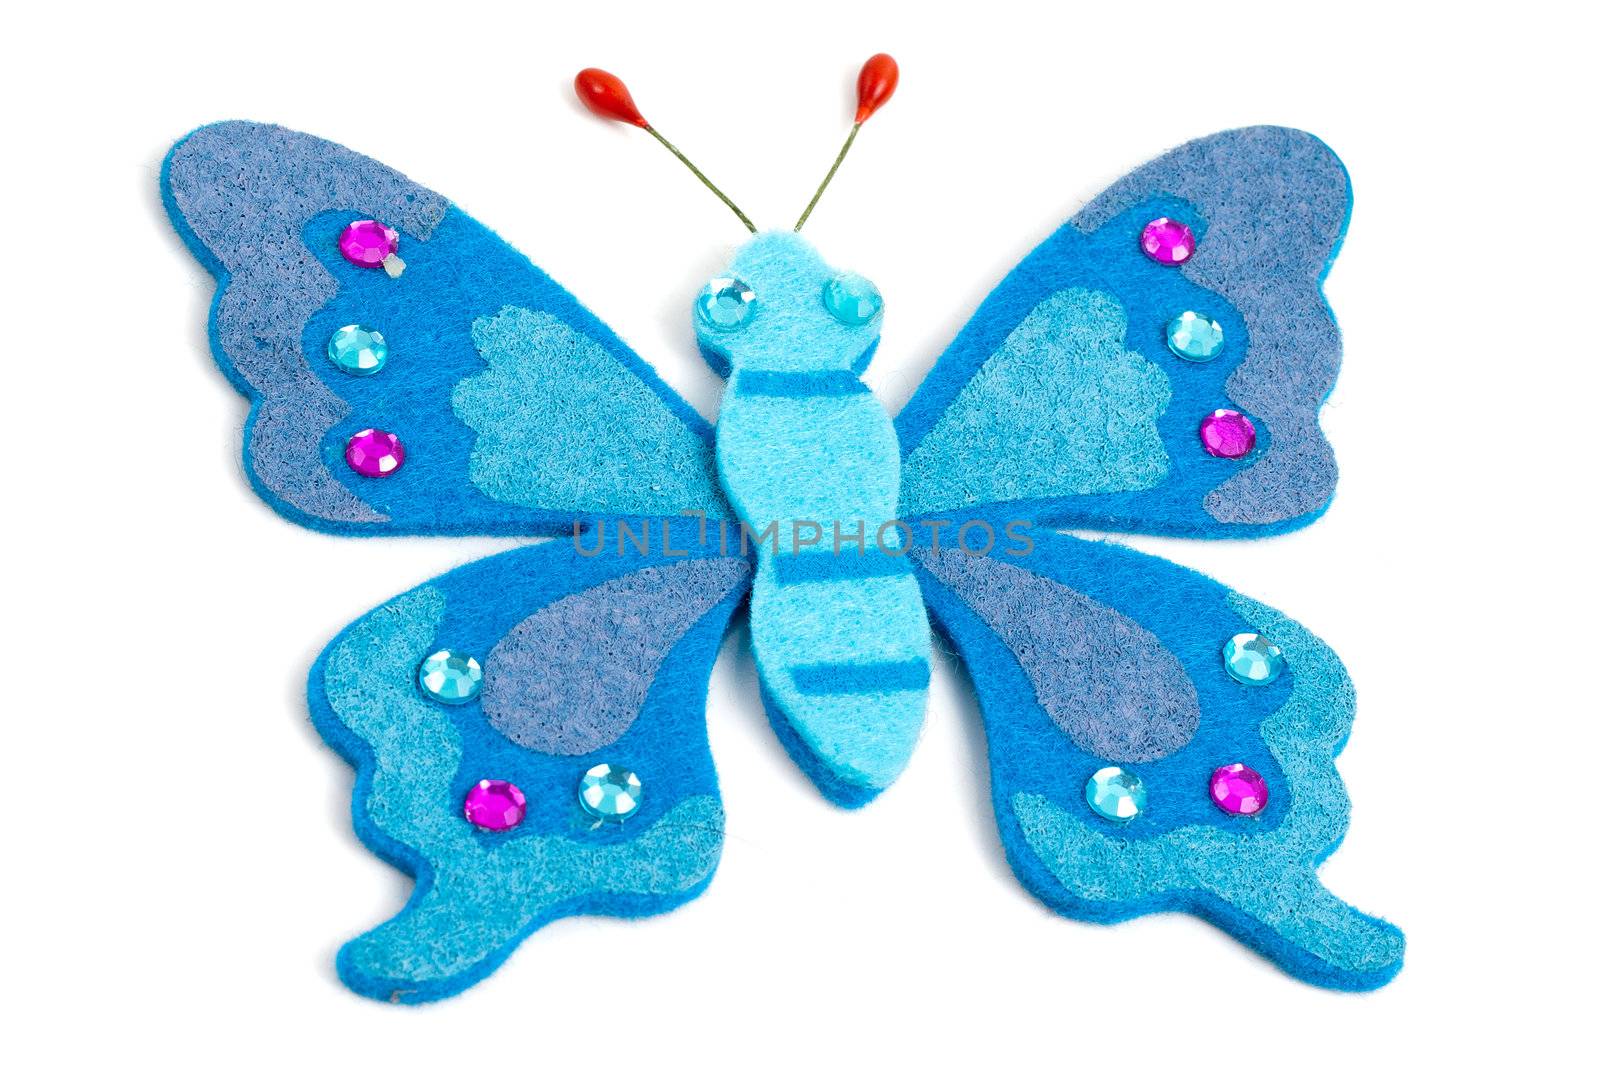 Artistic butterfly made from blue fabric, white studio background